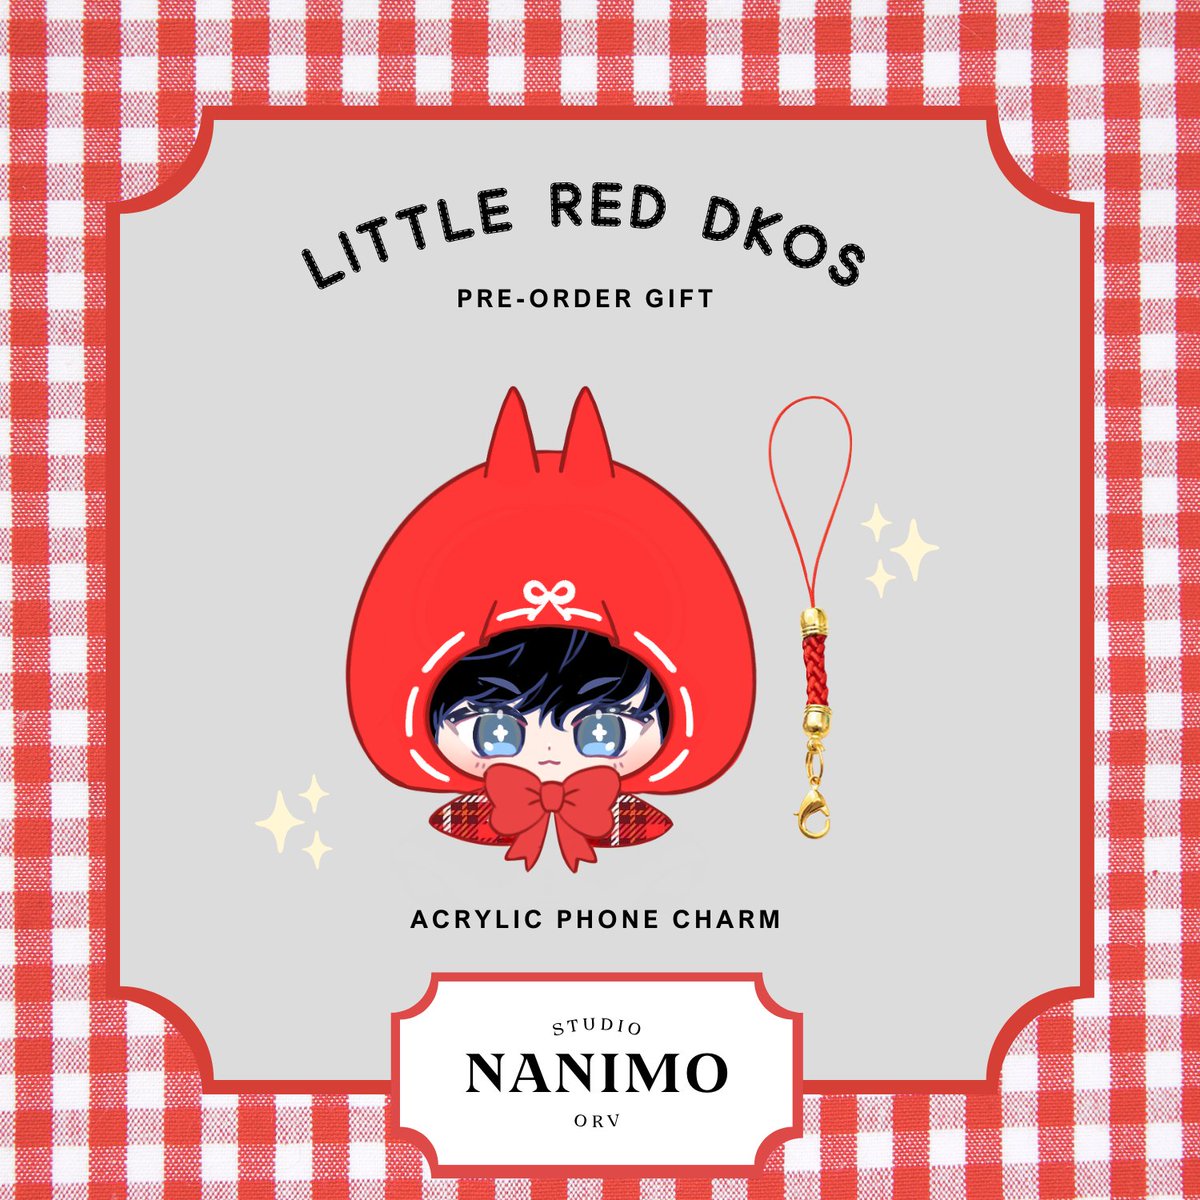 💫Little Red DKOS💫
15cm doll by @nicubiii

Pre-orders open this Friday~
Watch out for our doll giveaway!

#KDJ #dokja #kimdokja #joongdok #dkos #demonkingofsalvation #orv #15cmdoll #omniscientreadersviewpoint #전독시 #전지적독자시점